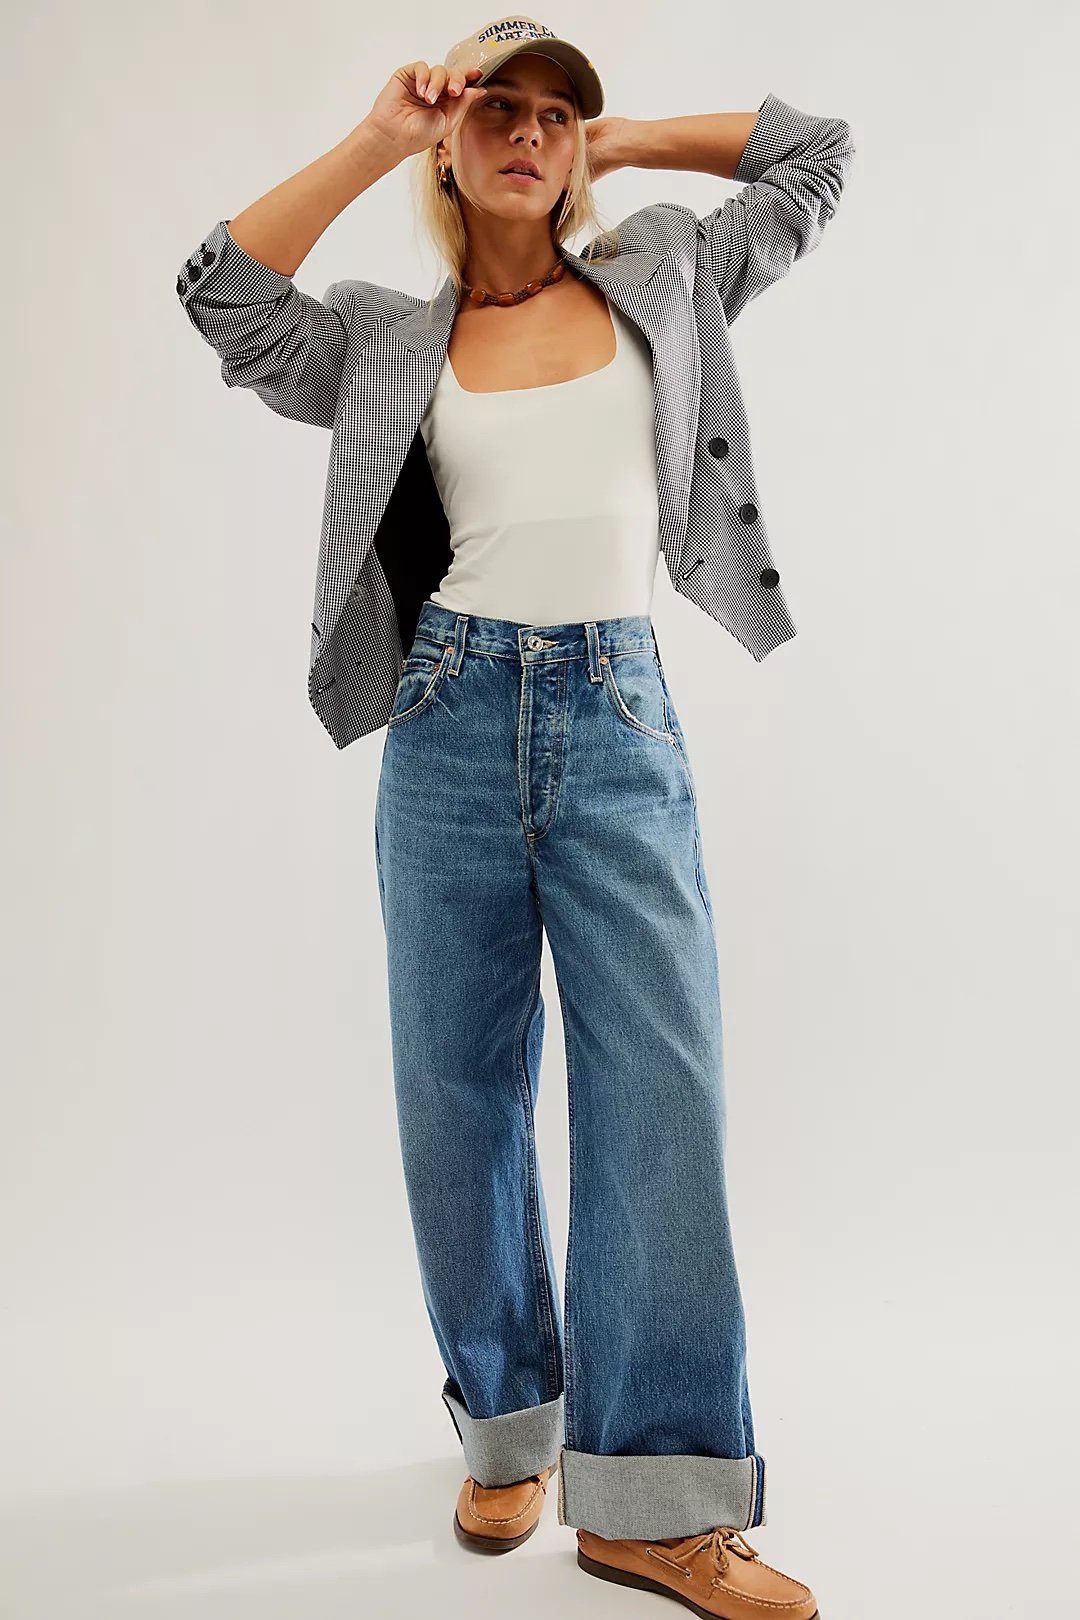 Citizens of Humanity Ayla Baggy Cuffed Crop Jeans